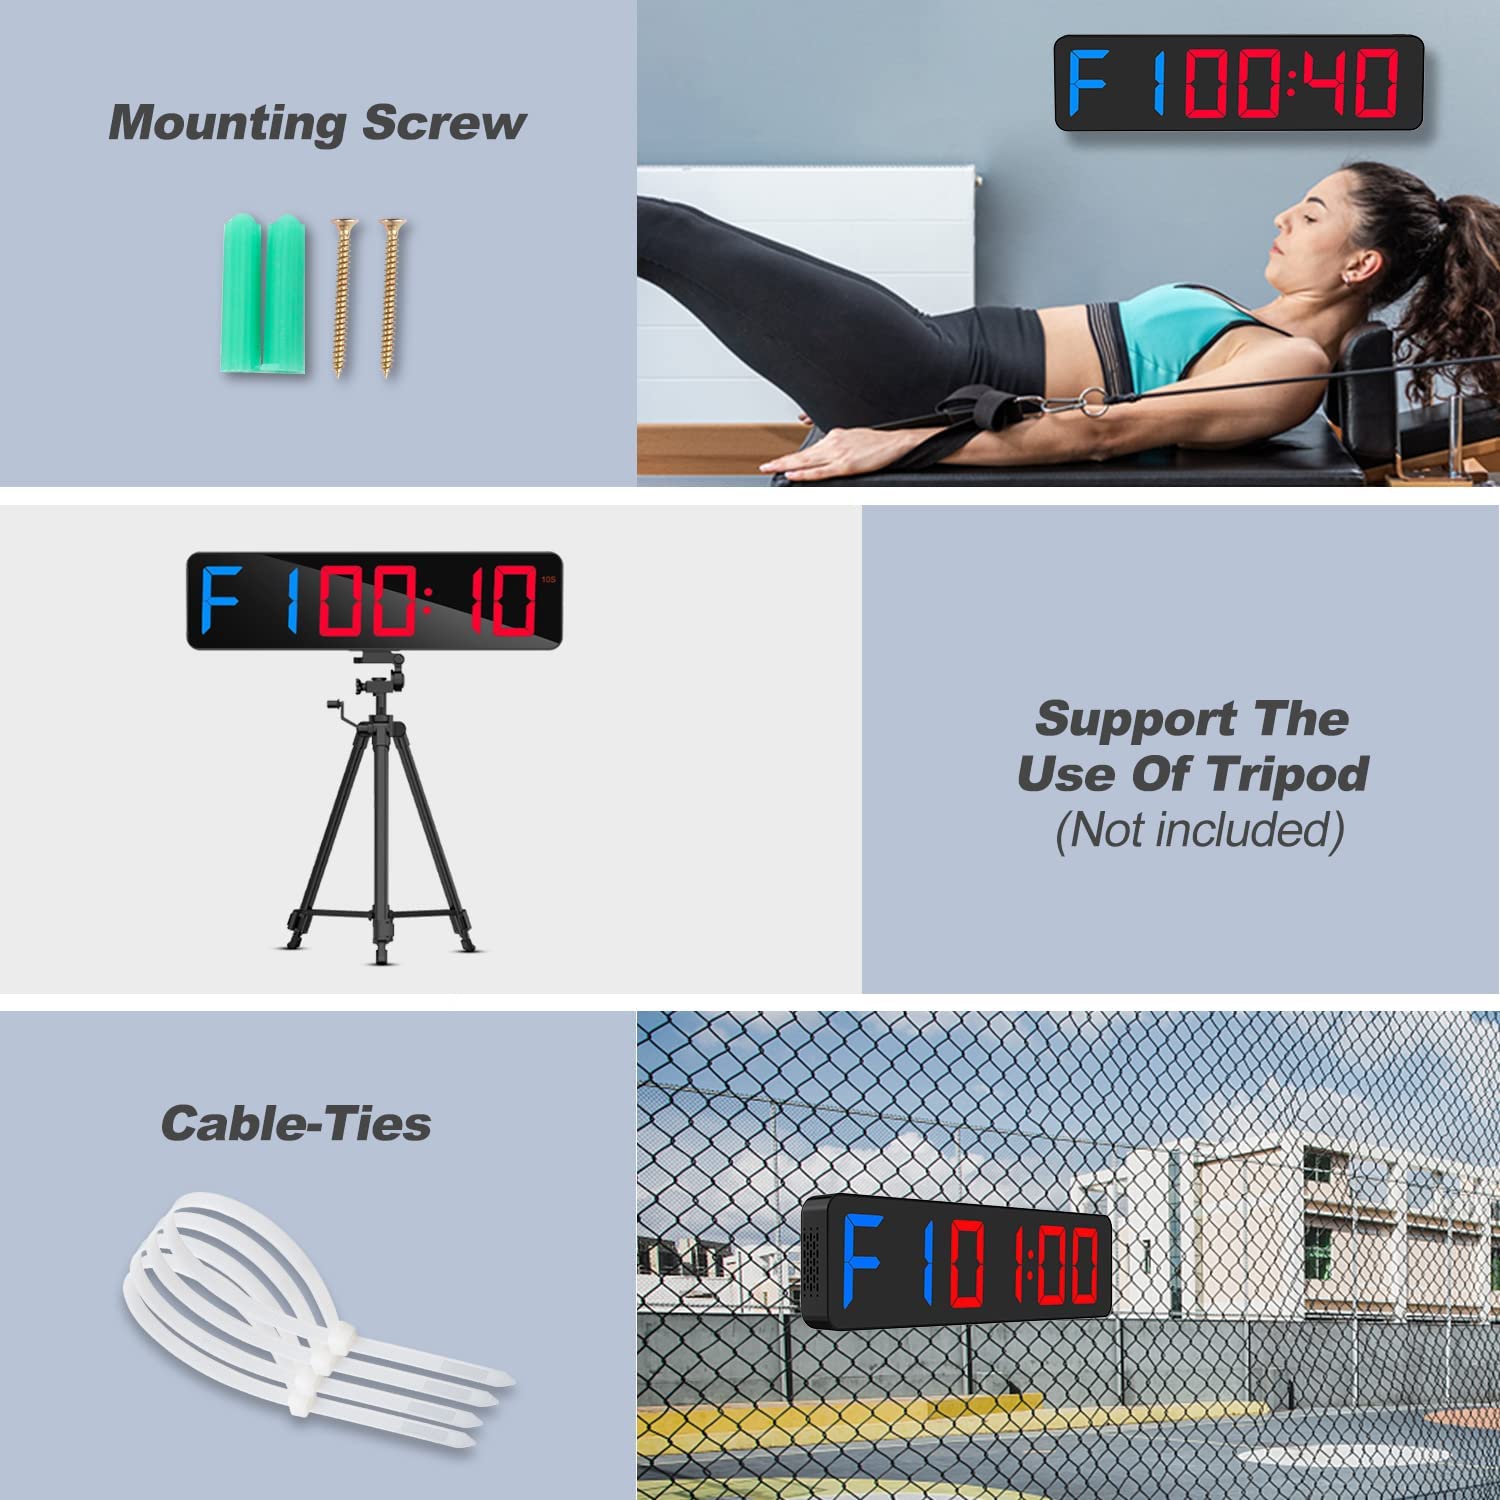 Tbest Gym Timer, Multifunction LED Interval Timer Wall-mounted for